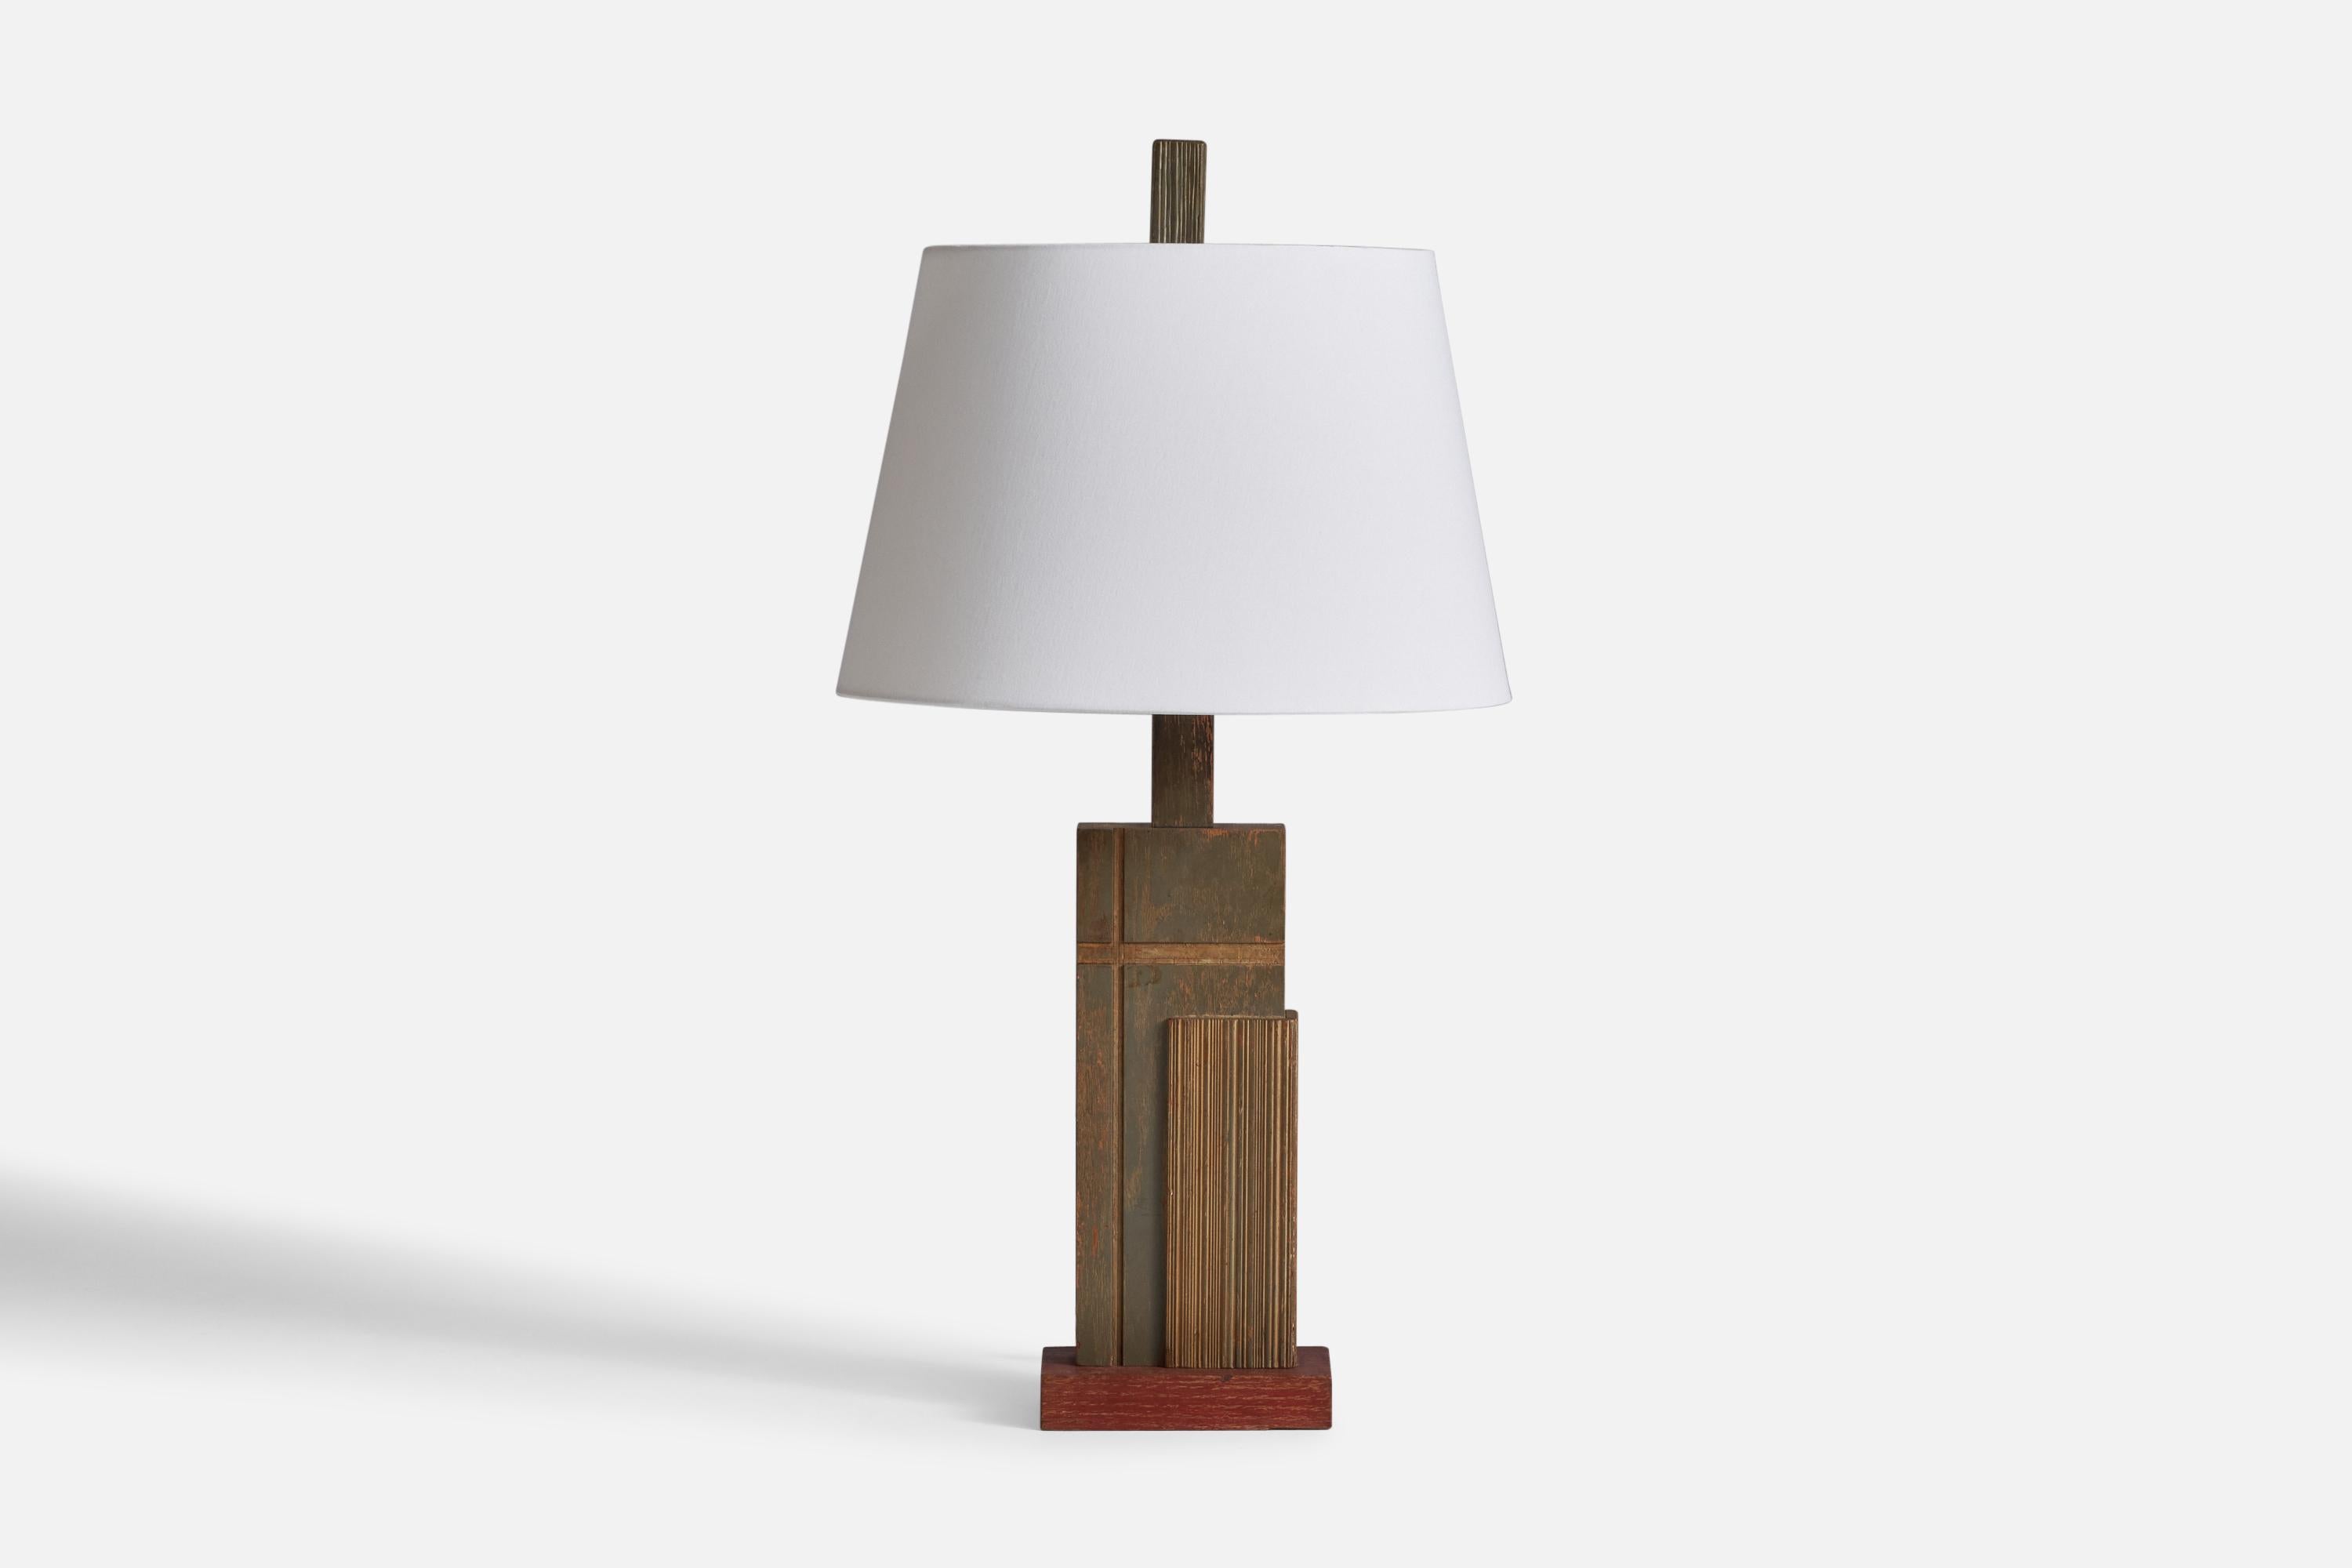 A green-painted wood table lamp designed and produced in the US, 1950s.

Dimensions of Lamp (inches): 28” H x 4.1” Diameter
Dimensions of Shade (inches): 12” Top Diameter x 16” Bottom Diameter x 10.5” H
Dimensions of Lamp with Shade (inches): 28” H